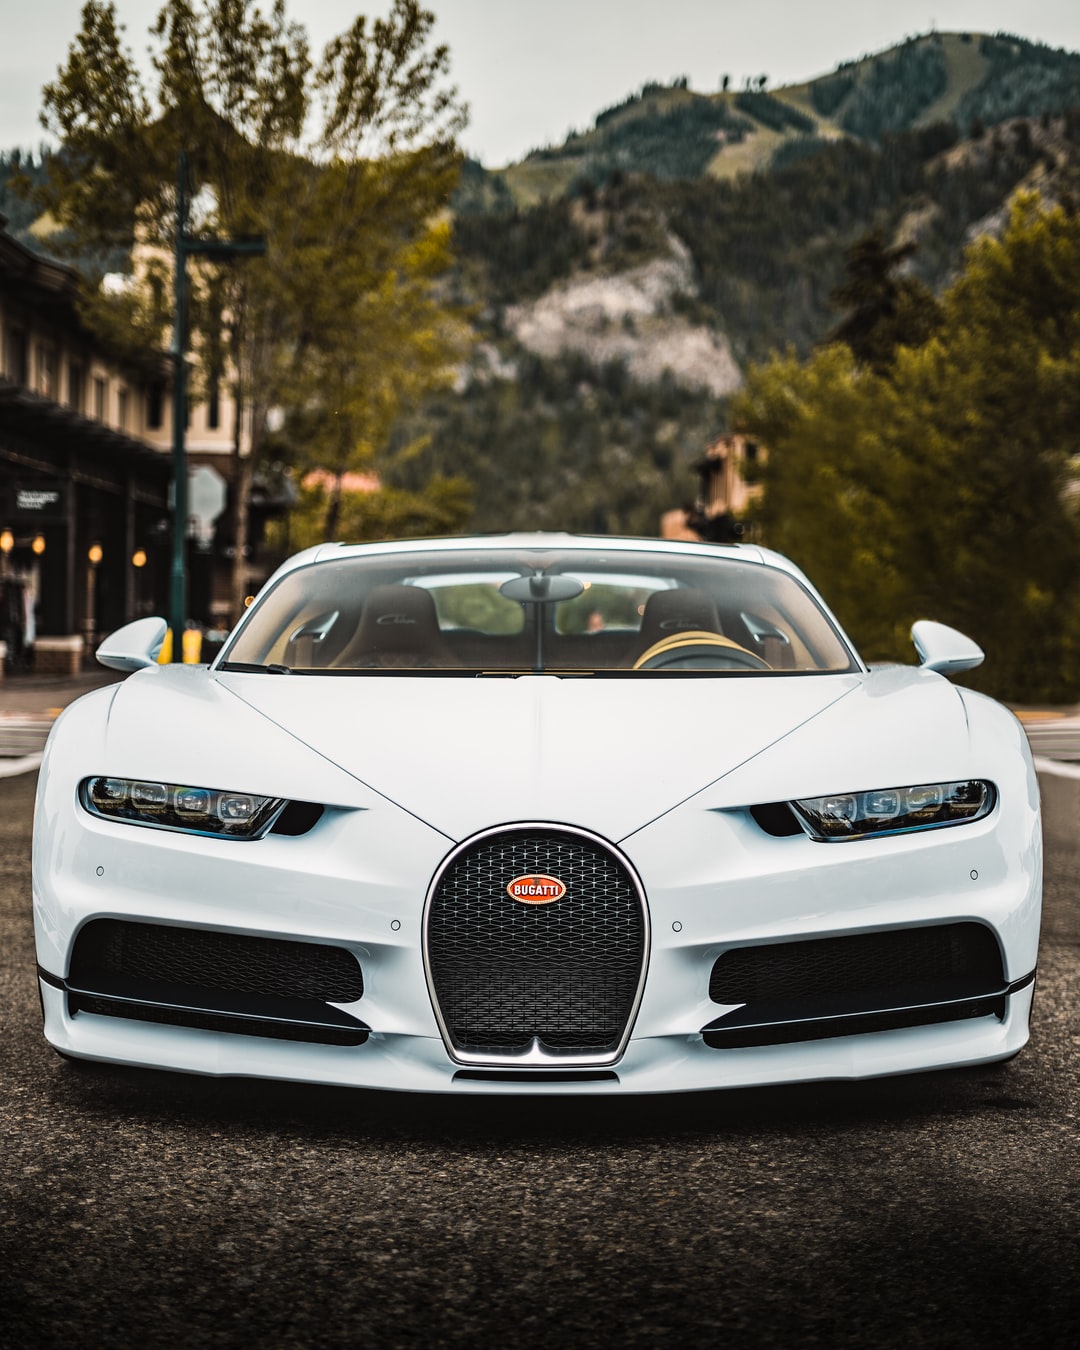 Bugatti Veyron Wallpaper for iPhone 11, Pro Max, X, 8, 7, 6 - Free Download  on 3Wallpapers